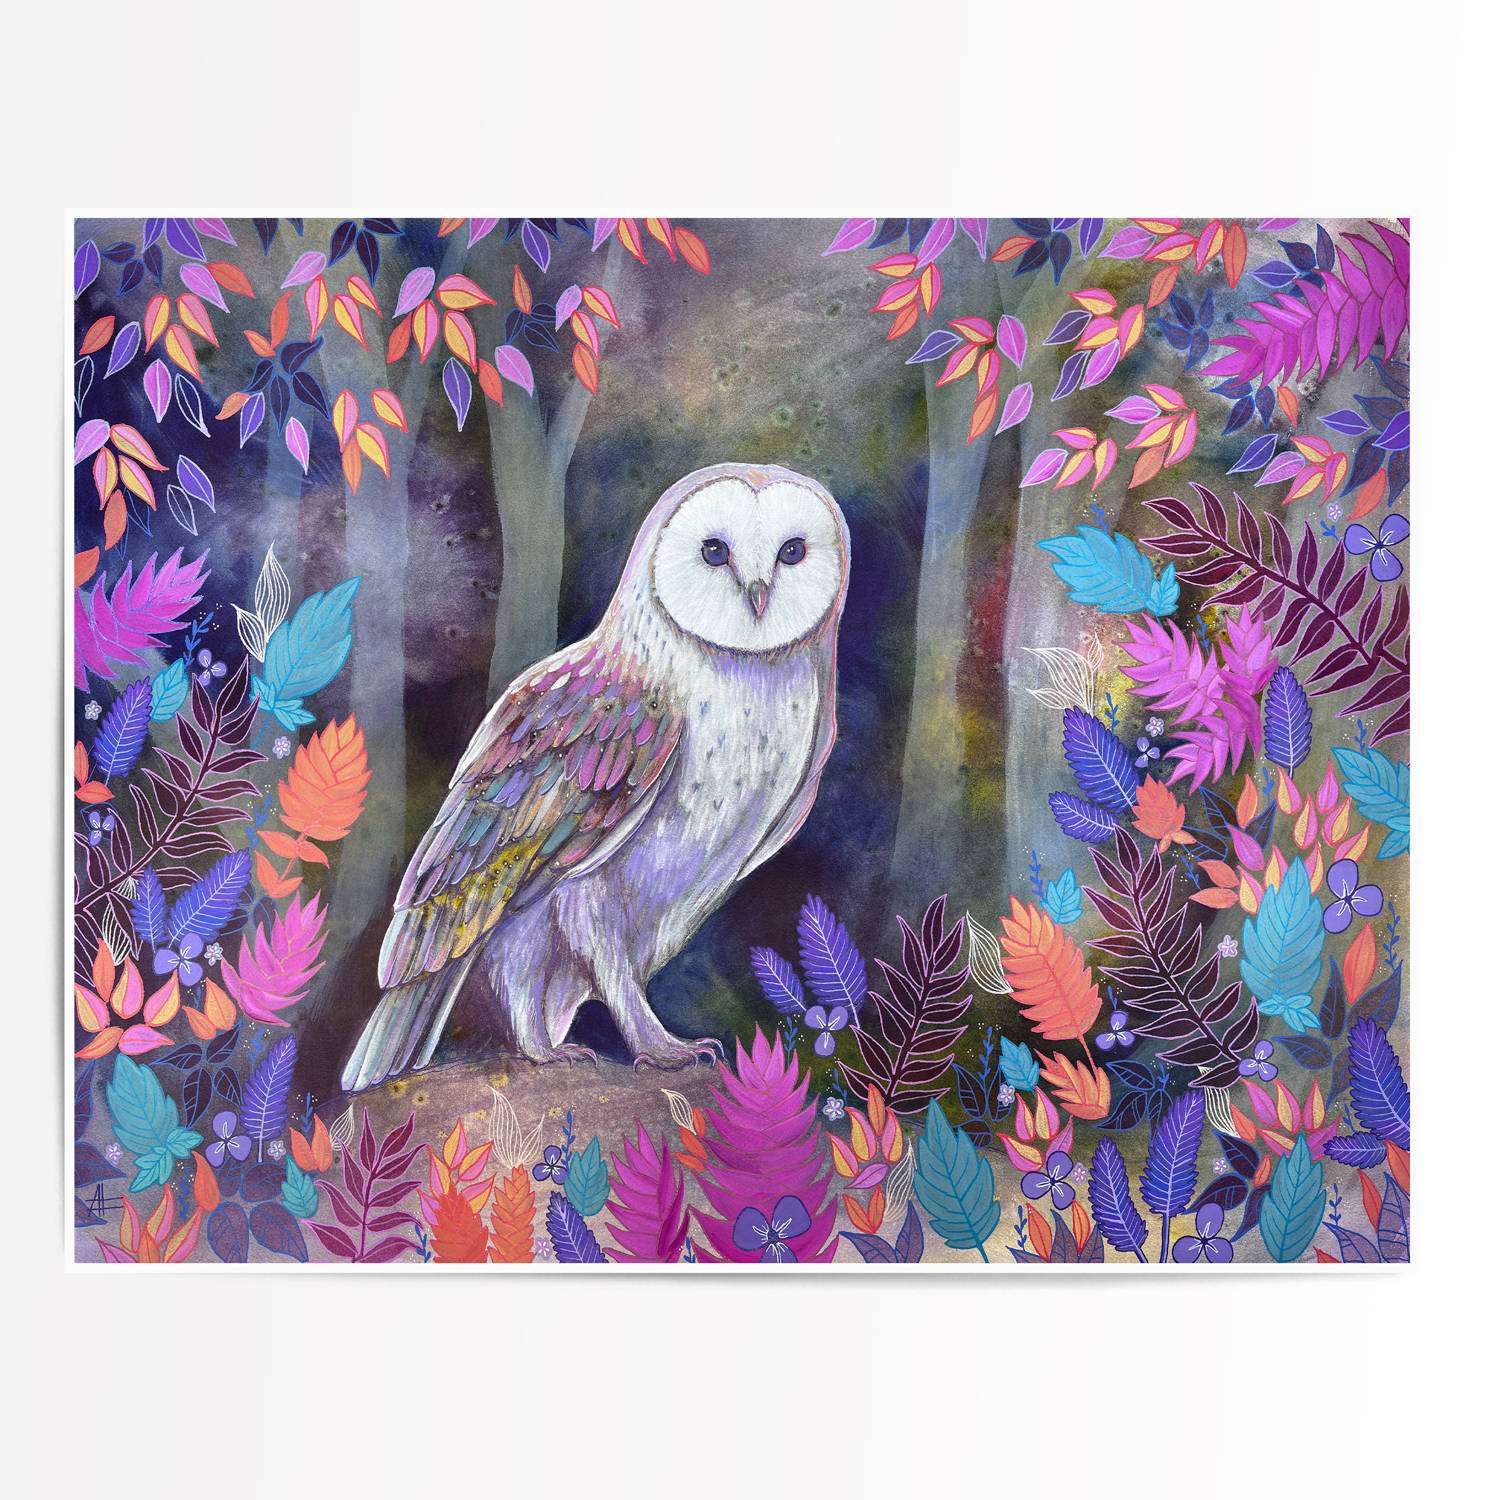 Single large art print of an owl among vivid foliage, demonstrating intricate detail and color.